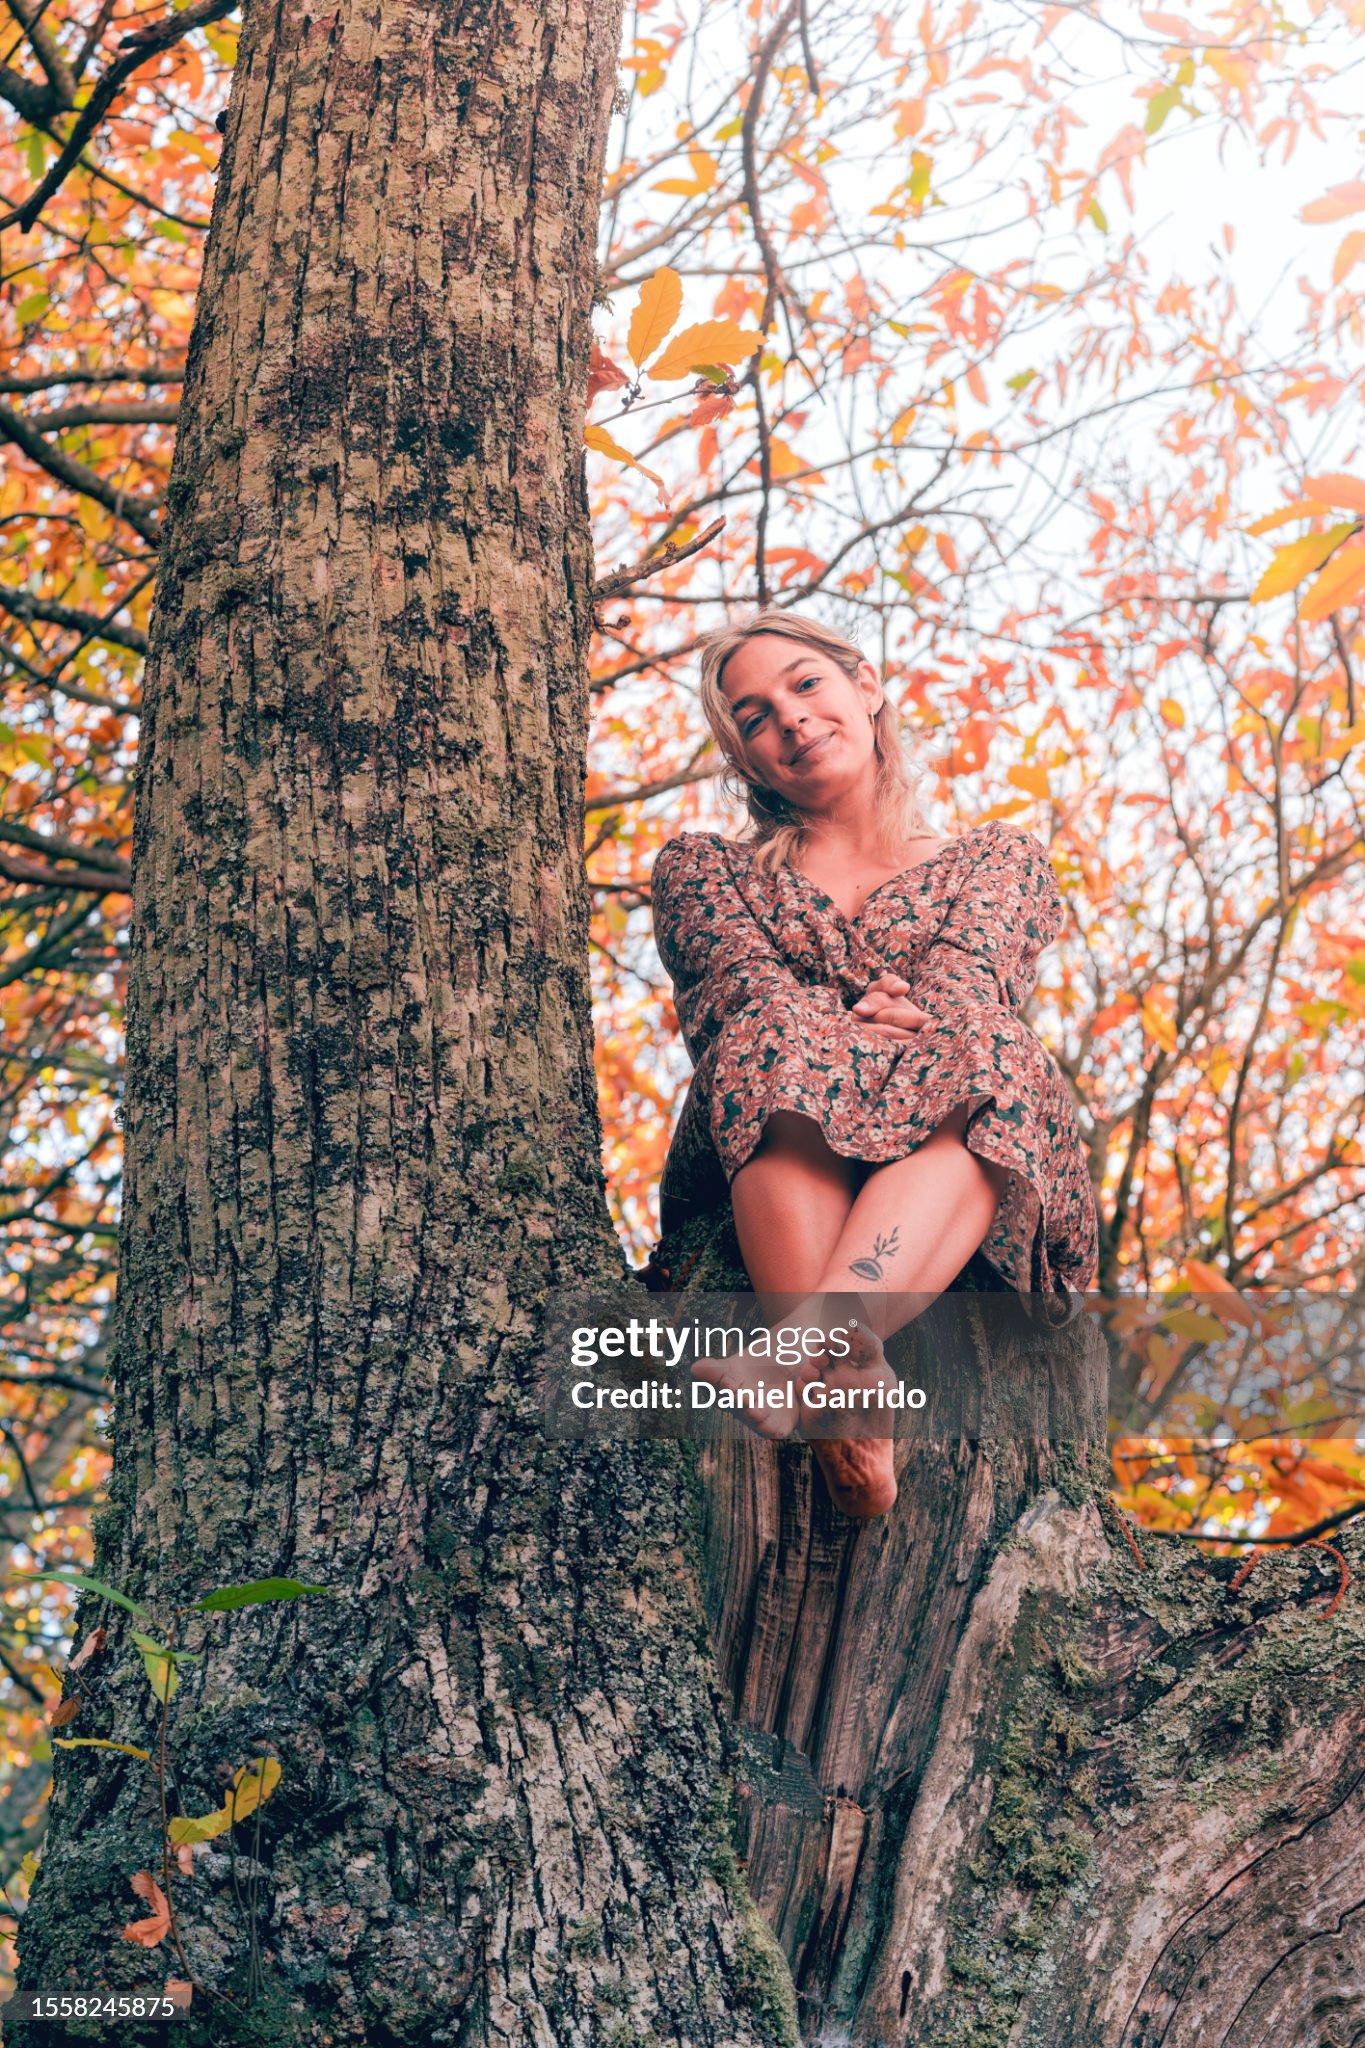 https://media.gettyimages.com/id/1558245875/photo/a-girl-in-an-autumnal-dress-on-a-chestnut-trunk-barefoot-in-autumn.jpg?s=2048x2048&amp;w=gi&amp;k=20&amp;c=YIdLyxzlb96BbFa8CaMJiJlm4obFF_TZxH1fqIGlY-g=